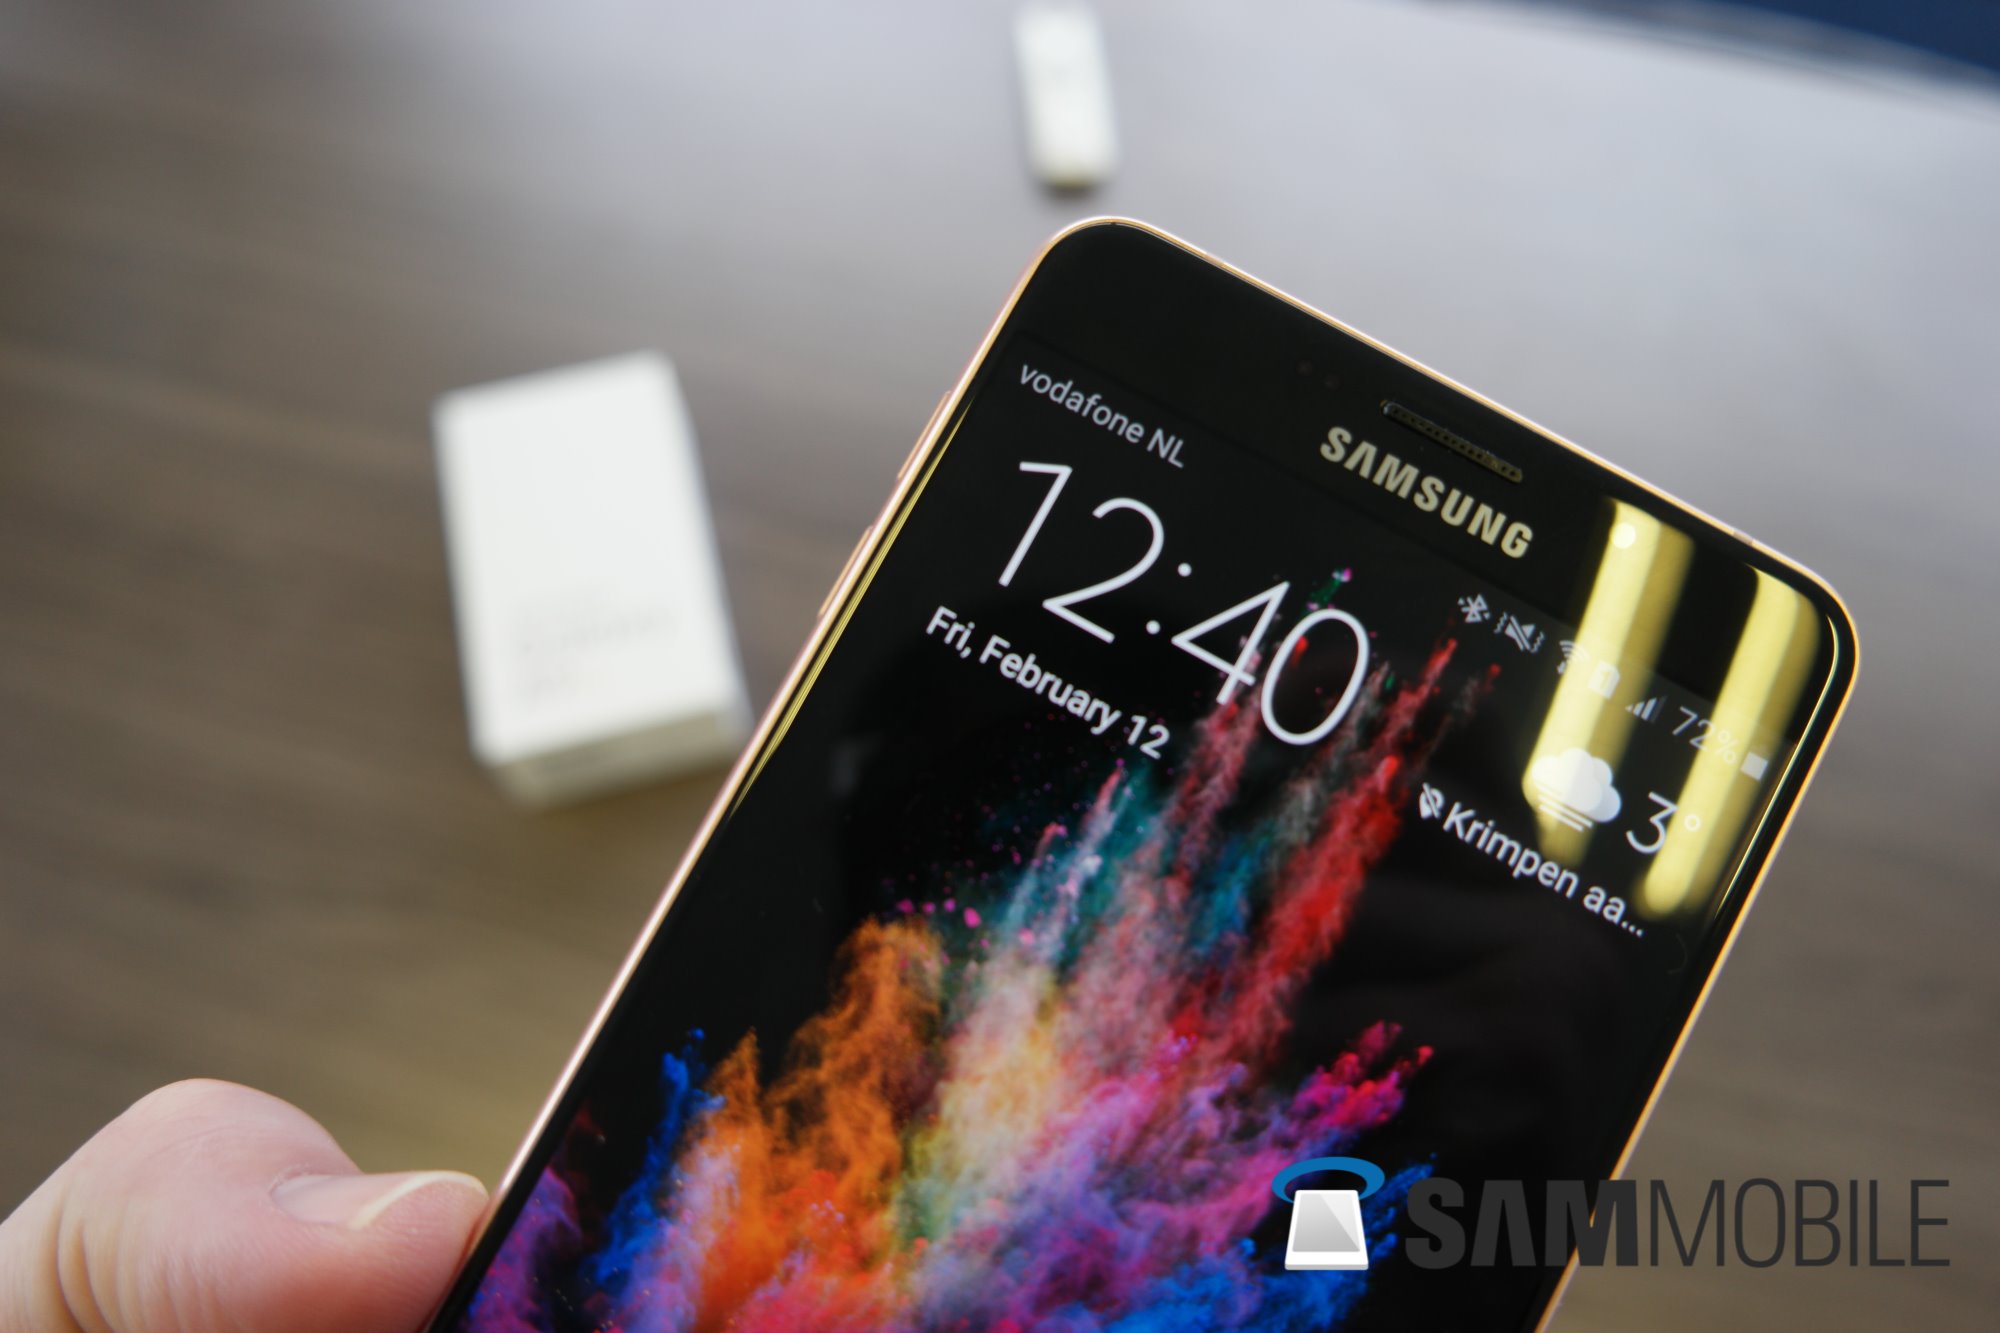 Samsung Galaxy A9 Pro spotted running Android  - SamMobile - SamMobile